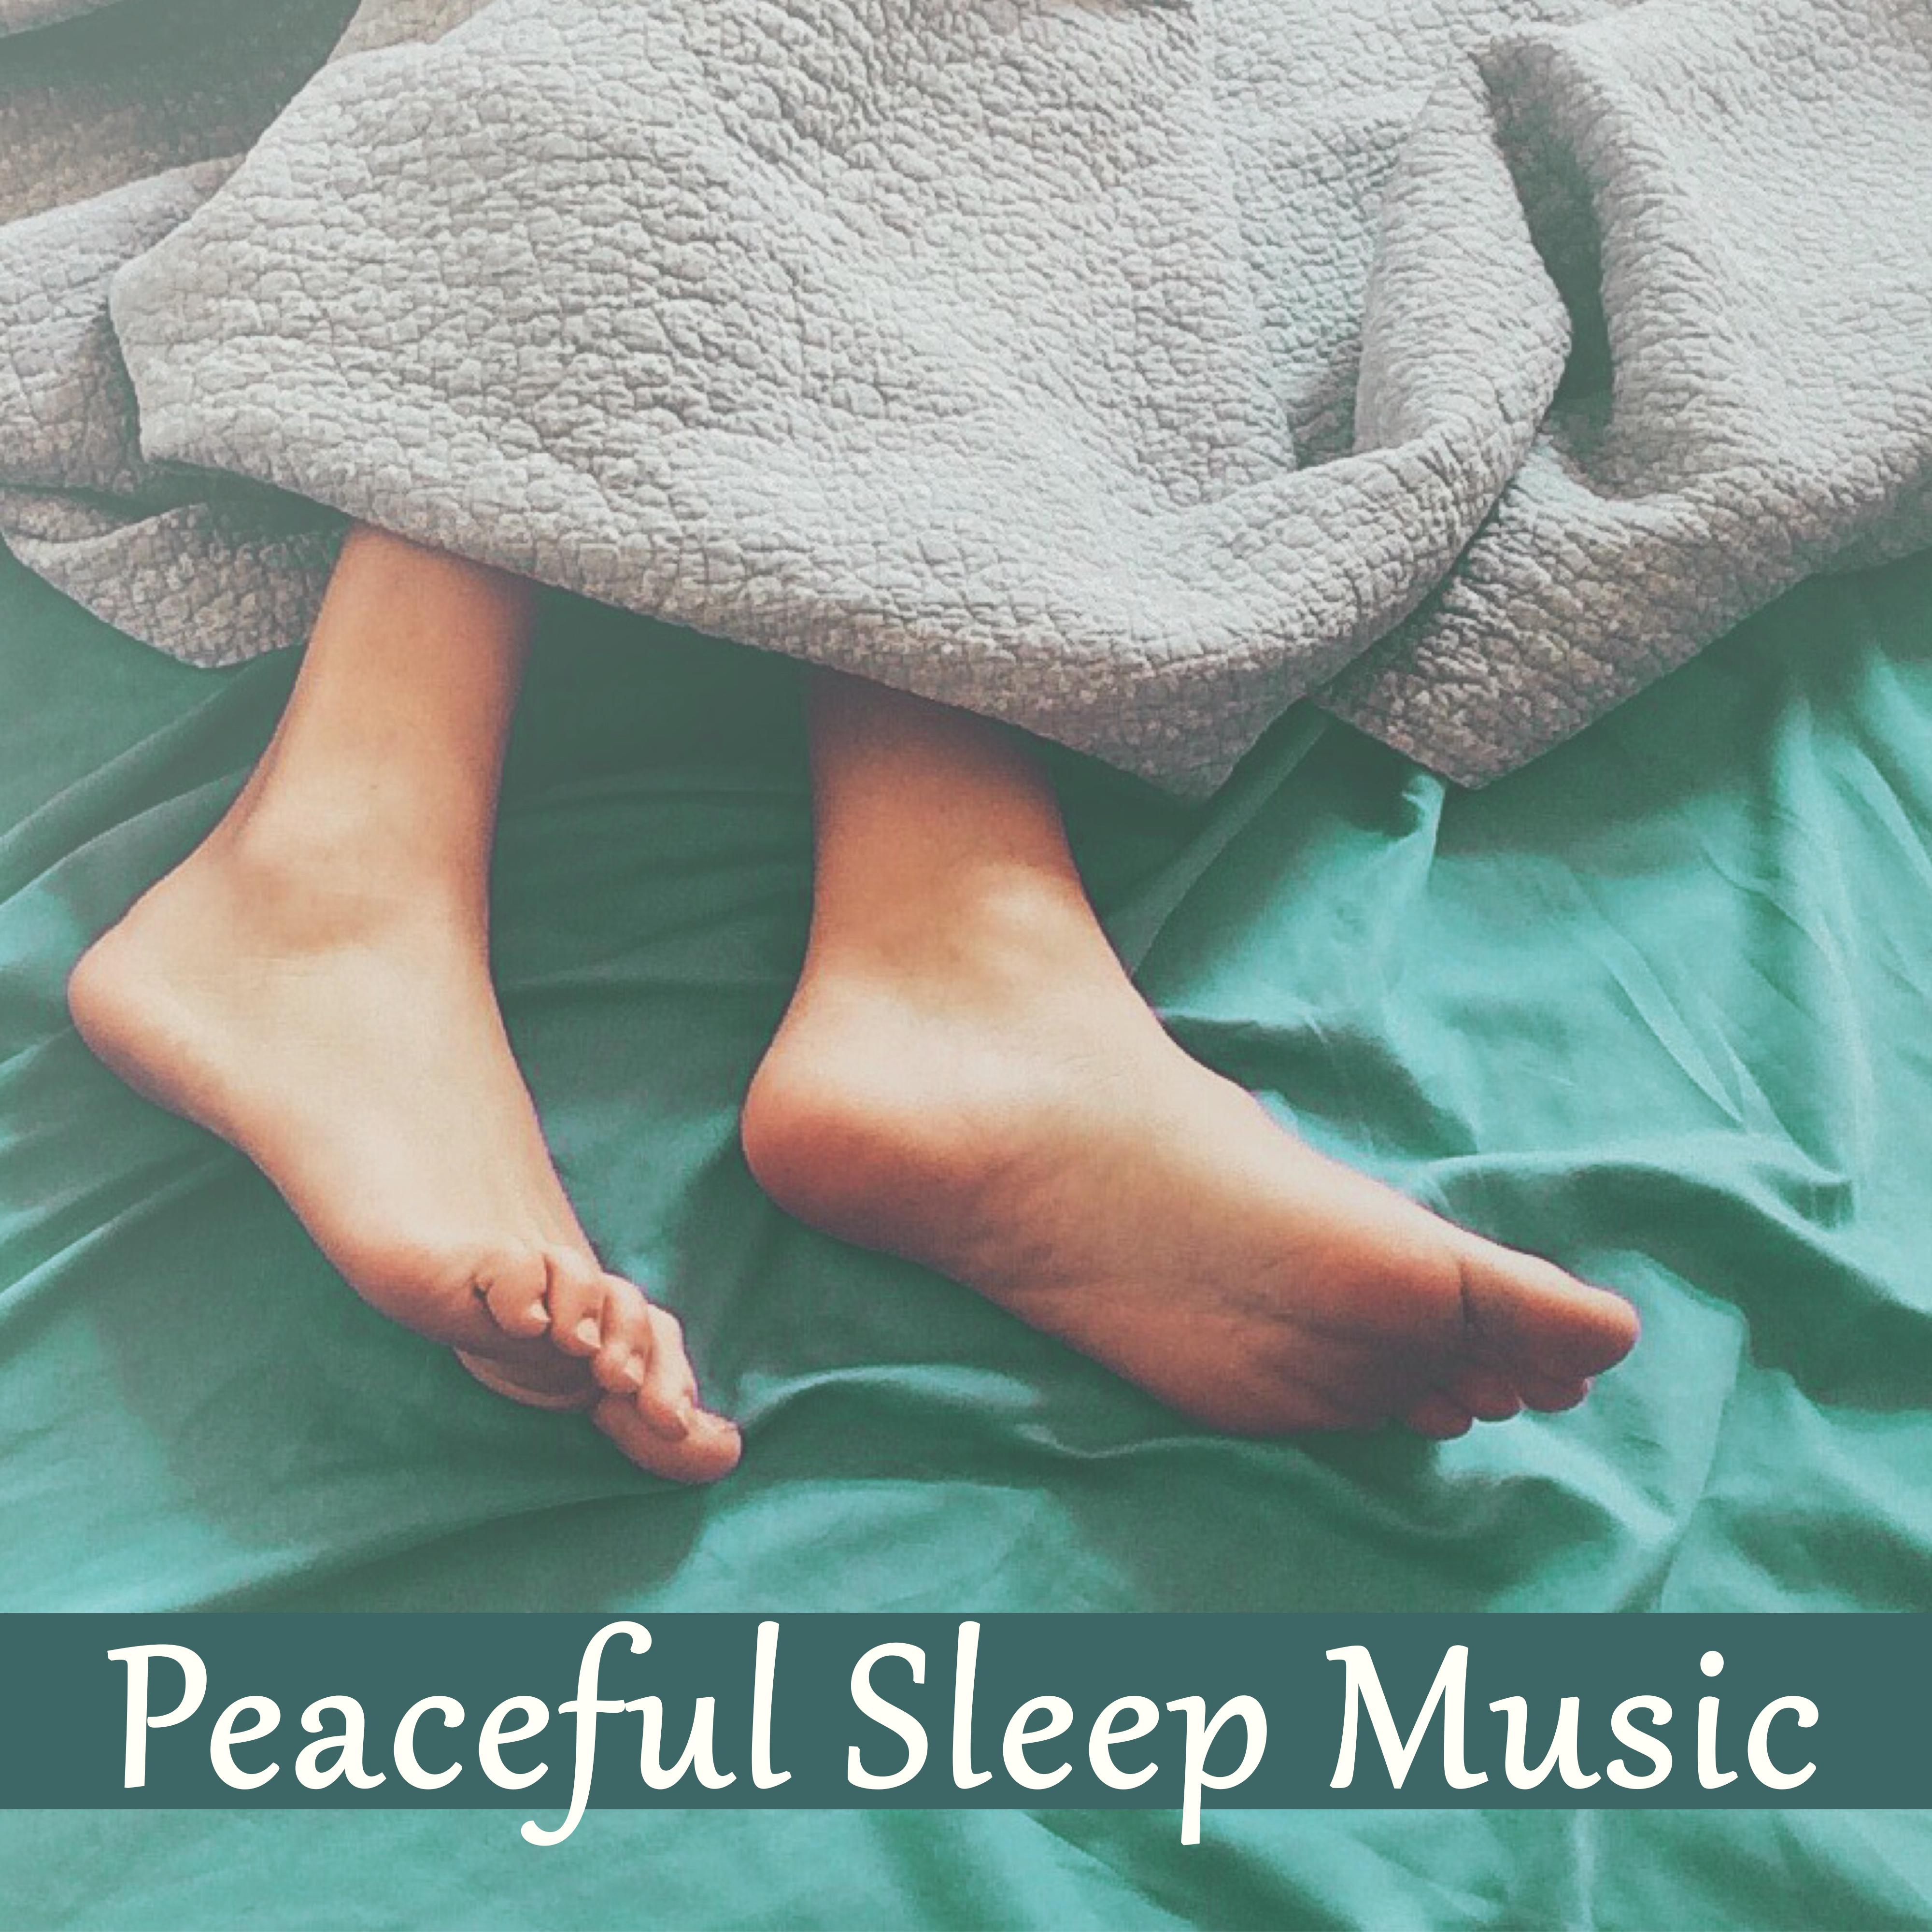 Peaceful Sleep Music – Deep Dreams, Sweet Lullaby, Calming Melodies to Pillow, Night Sounds, Relax, Bedtime, Restful Sleep